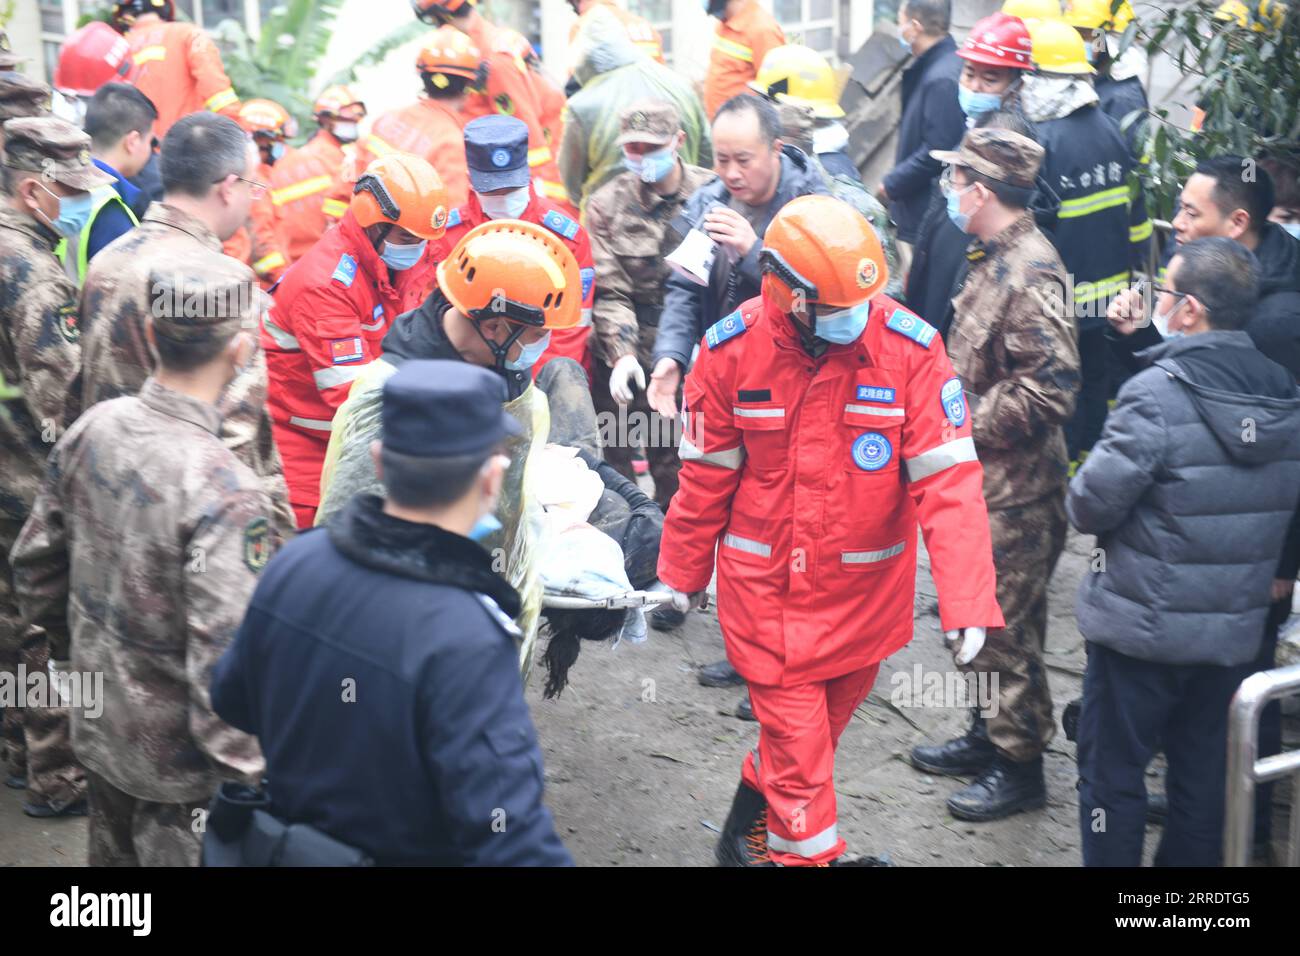 220107 -- CHONGQING, Jan. 7, 2022  -- Rescuers transport a trapped person at the site of a blast in Wulong District, southwest China s Chongqing, Jan. 7, 2022. More than 20 people were believed to have been trapped after a blast rocked a canteen of a subdistrict office in Wulong District, southwest China s Chongqing Municipality, on Friday noon. The accident took place at 12:10 p.m. due to suspected gas leakage which triggered the explosion and caused the collapse, said the municipal publicity department. According to witnesses, people were having lunch in the canteen when the blast took place Stock Photo